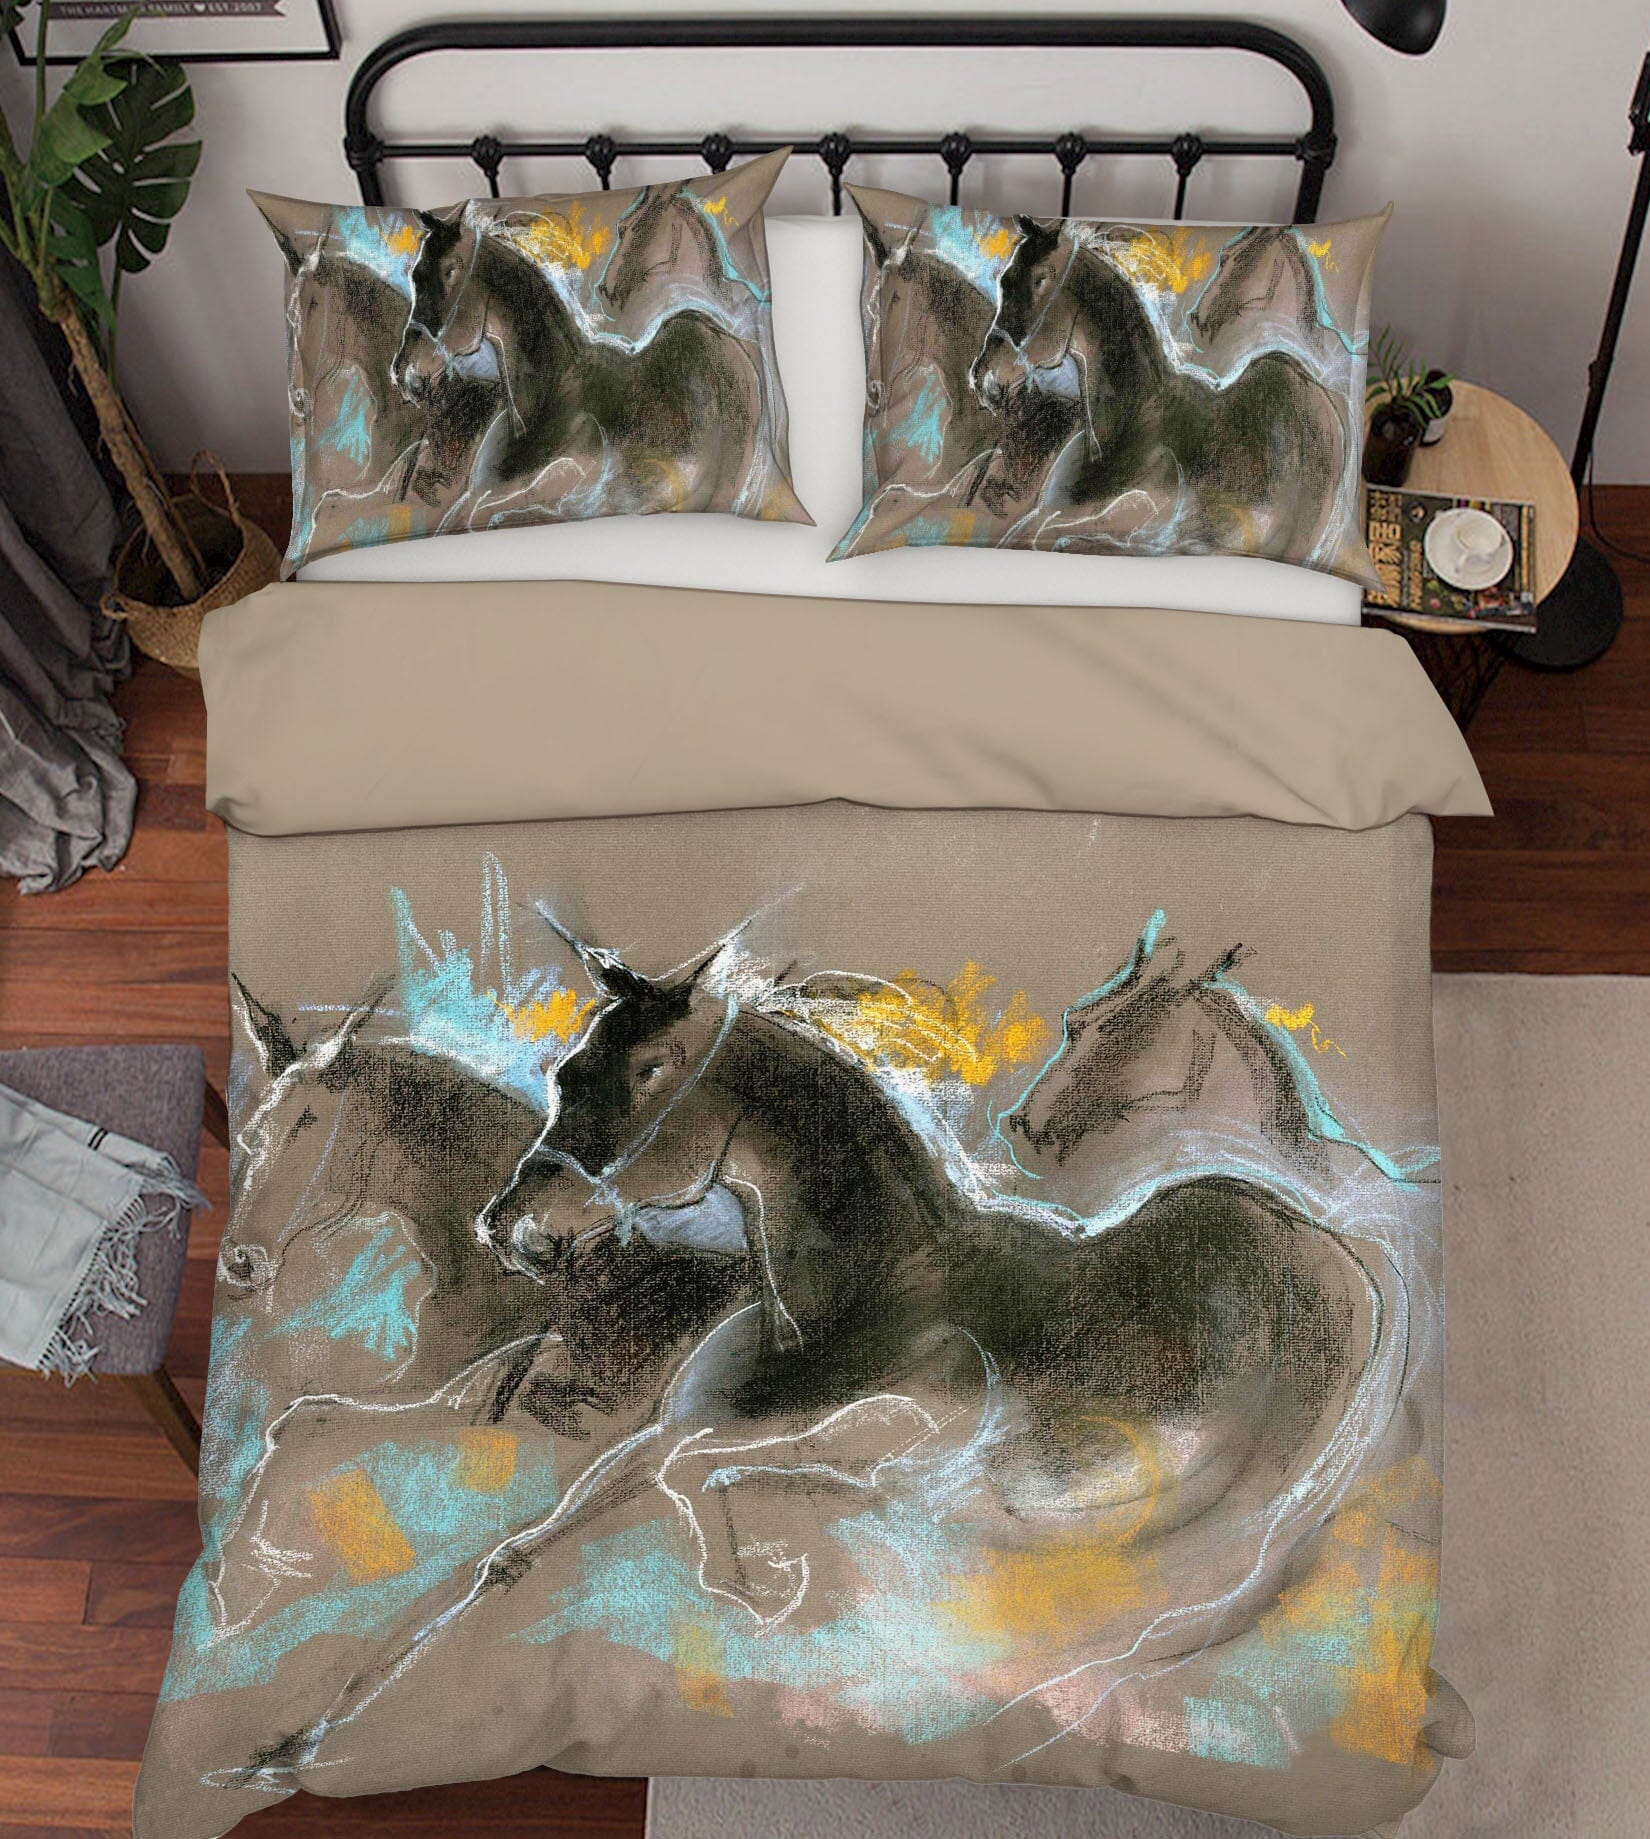 3D Running Horse 2013 Anne Farrall Doyle Bedding Bed Pillowcases Quilt Quiet Covers AJ Creativity Home 